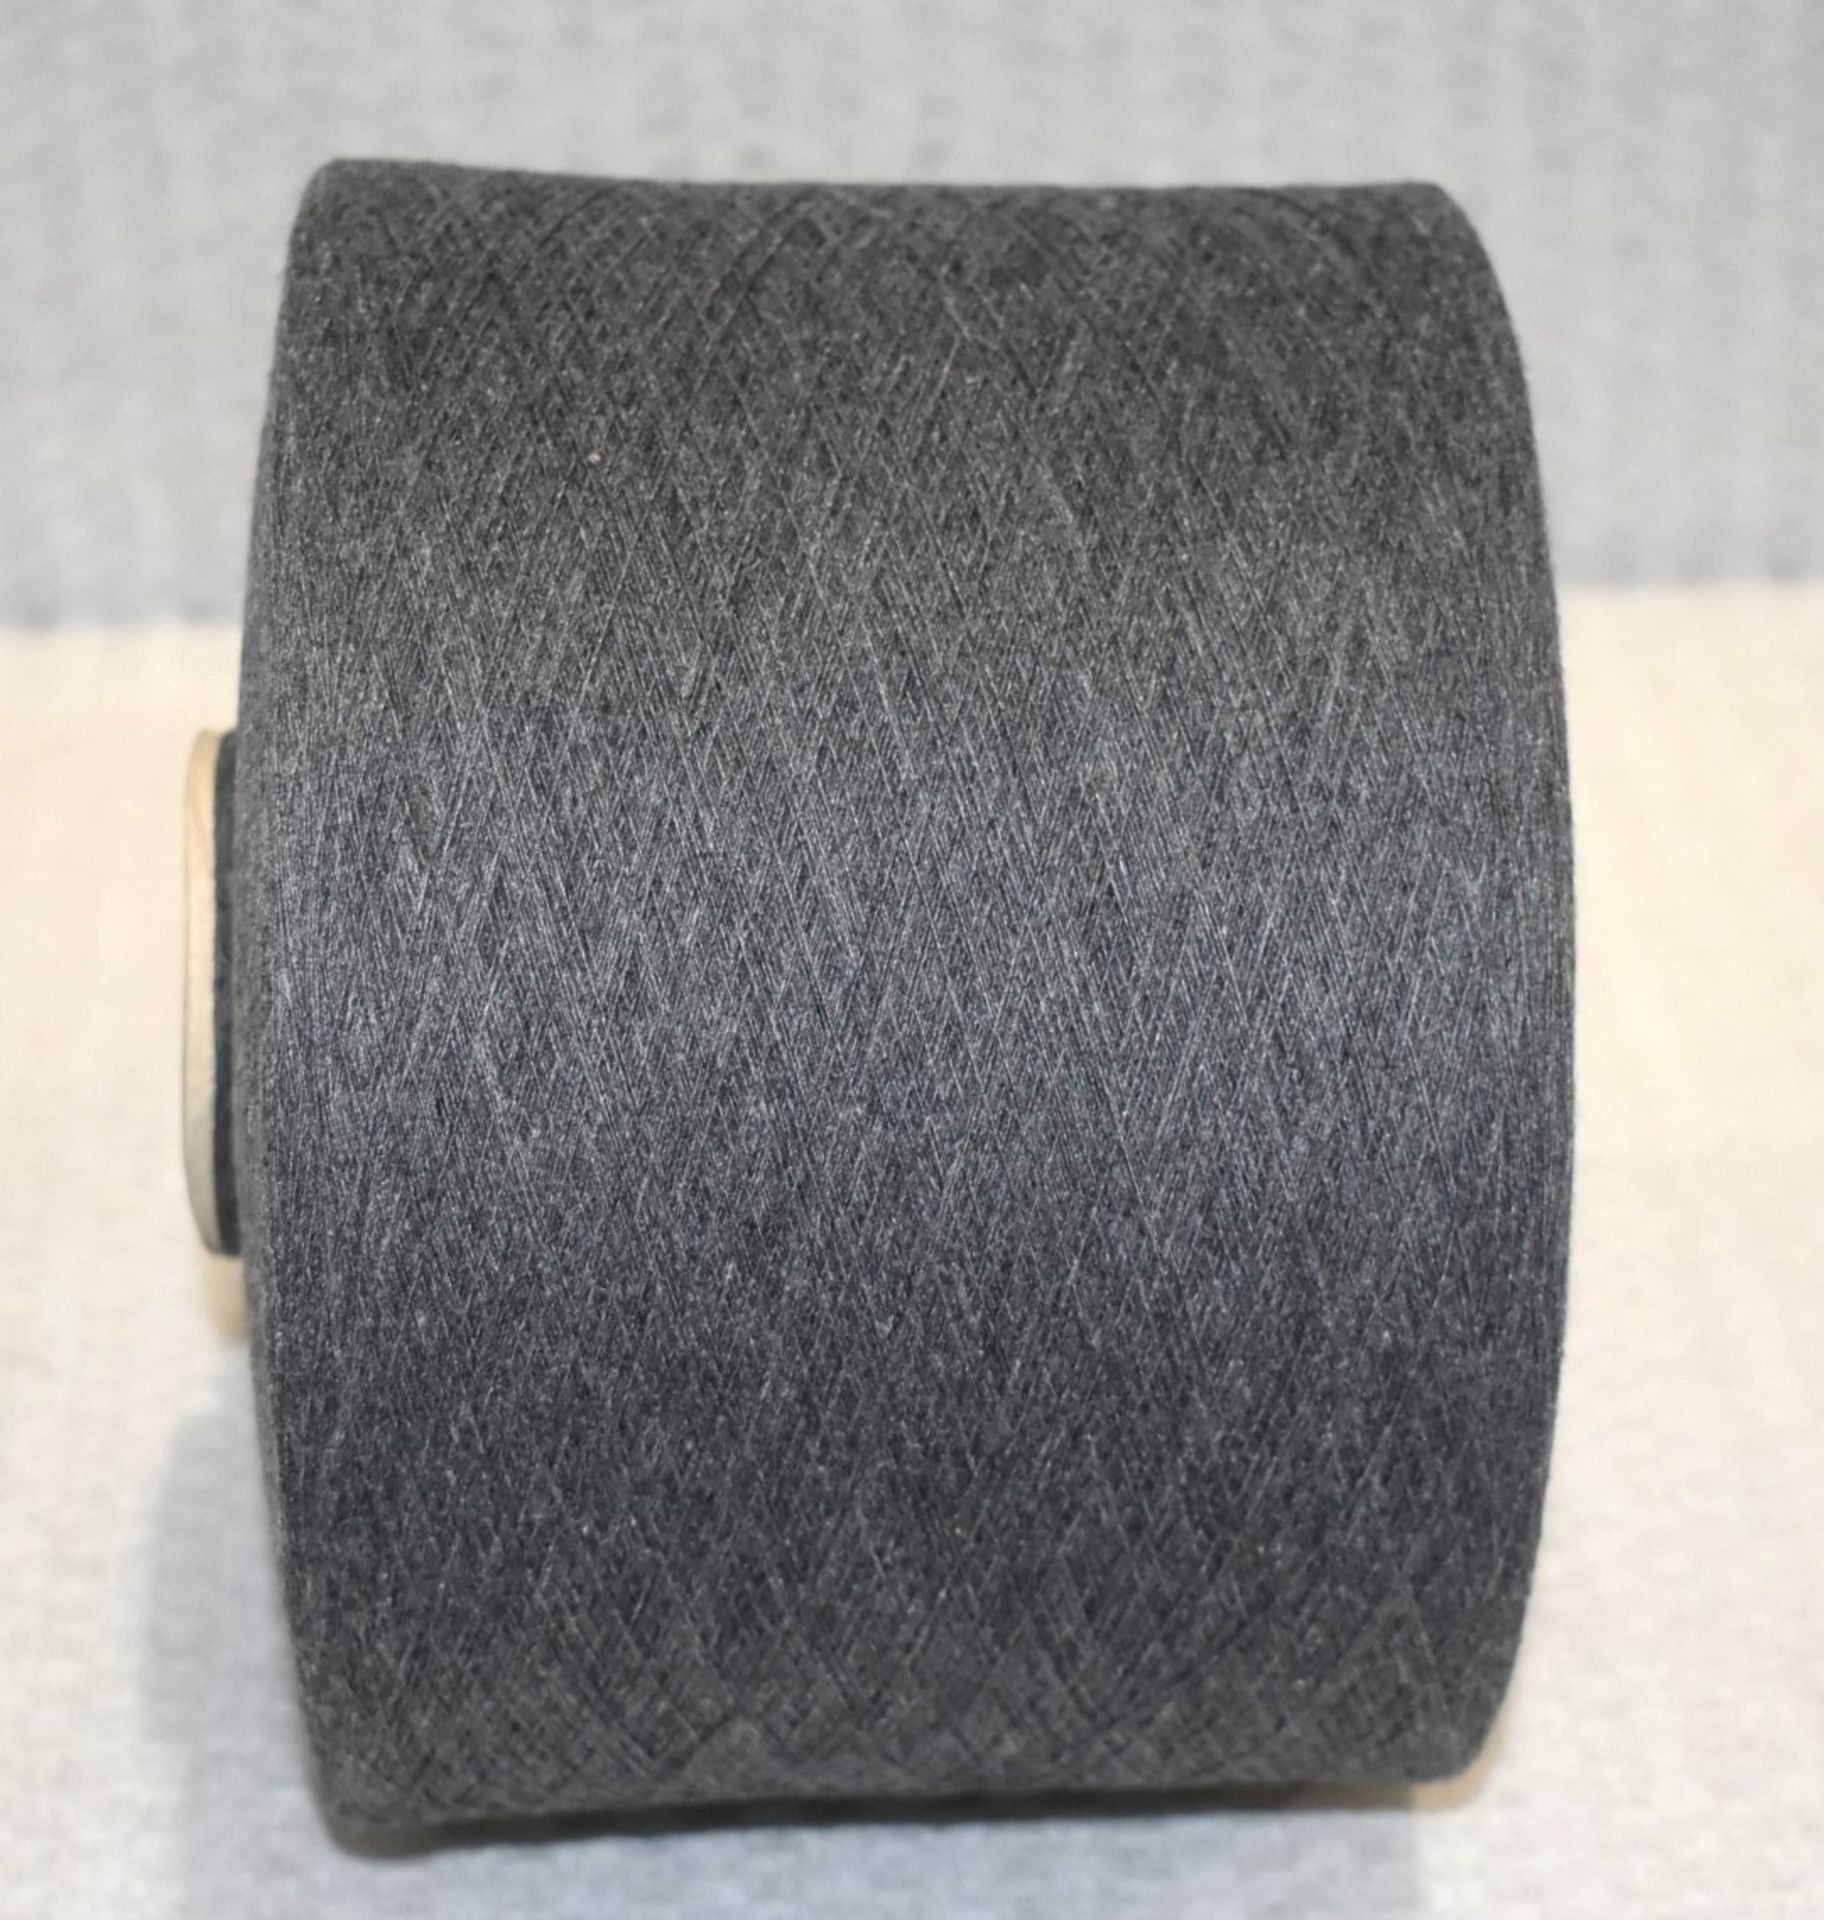 4 x Cones of 1/13 MicroCotton Knitting Yarn - Mid Grey - Approx Weight: 2,500g - New Stock ABL Yarn - Image 10 of 11